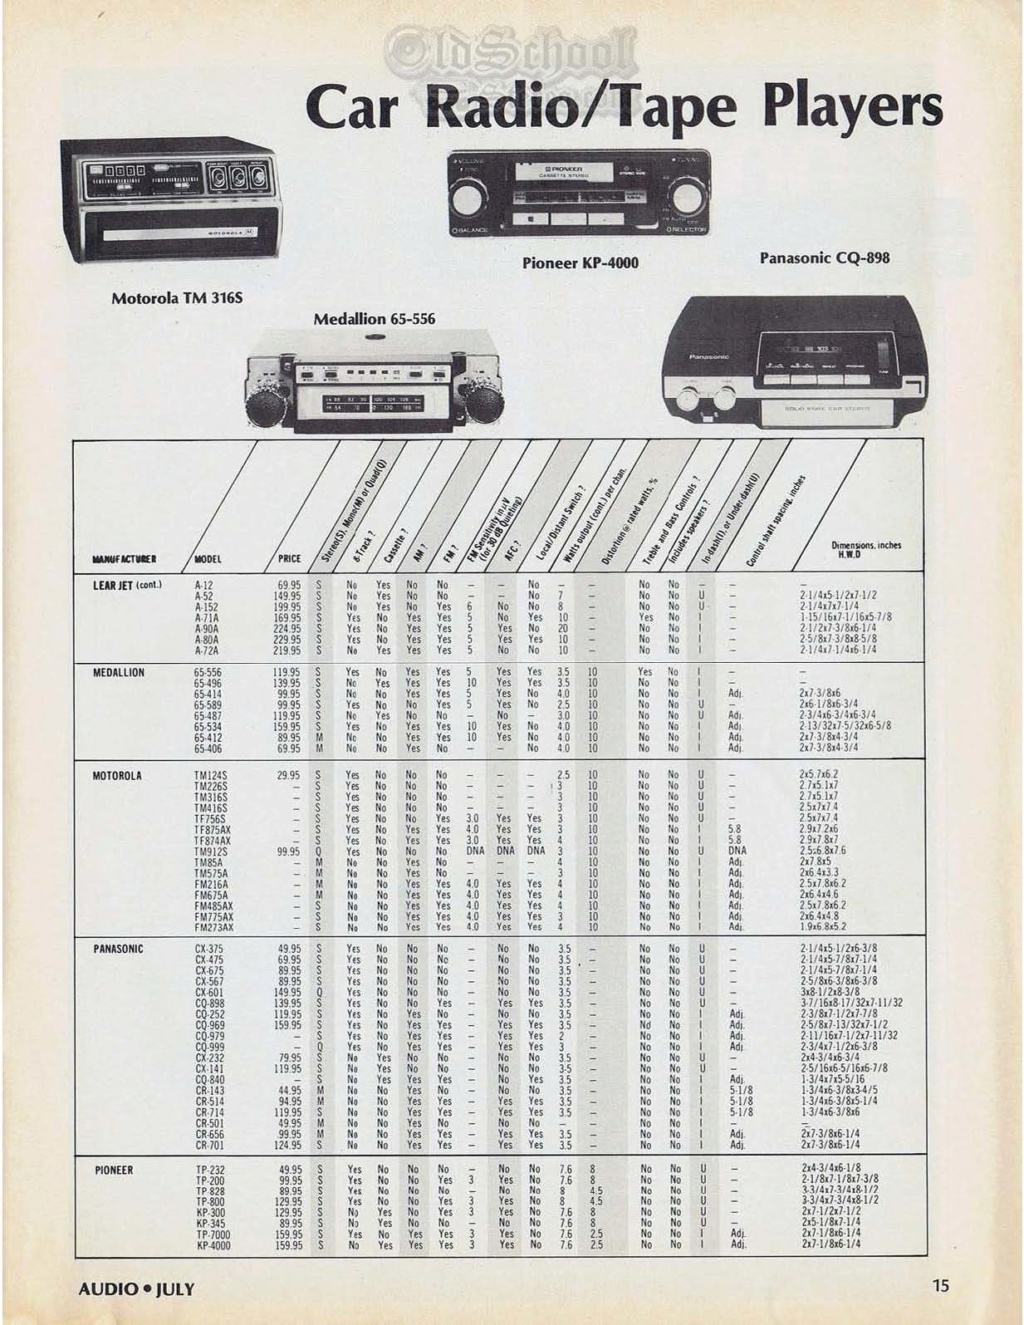 1975 - Audio Magazine - Car-Stereo - Directory Part #2 1975_a13